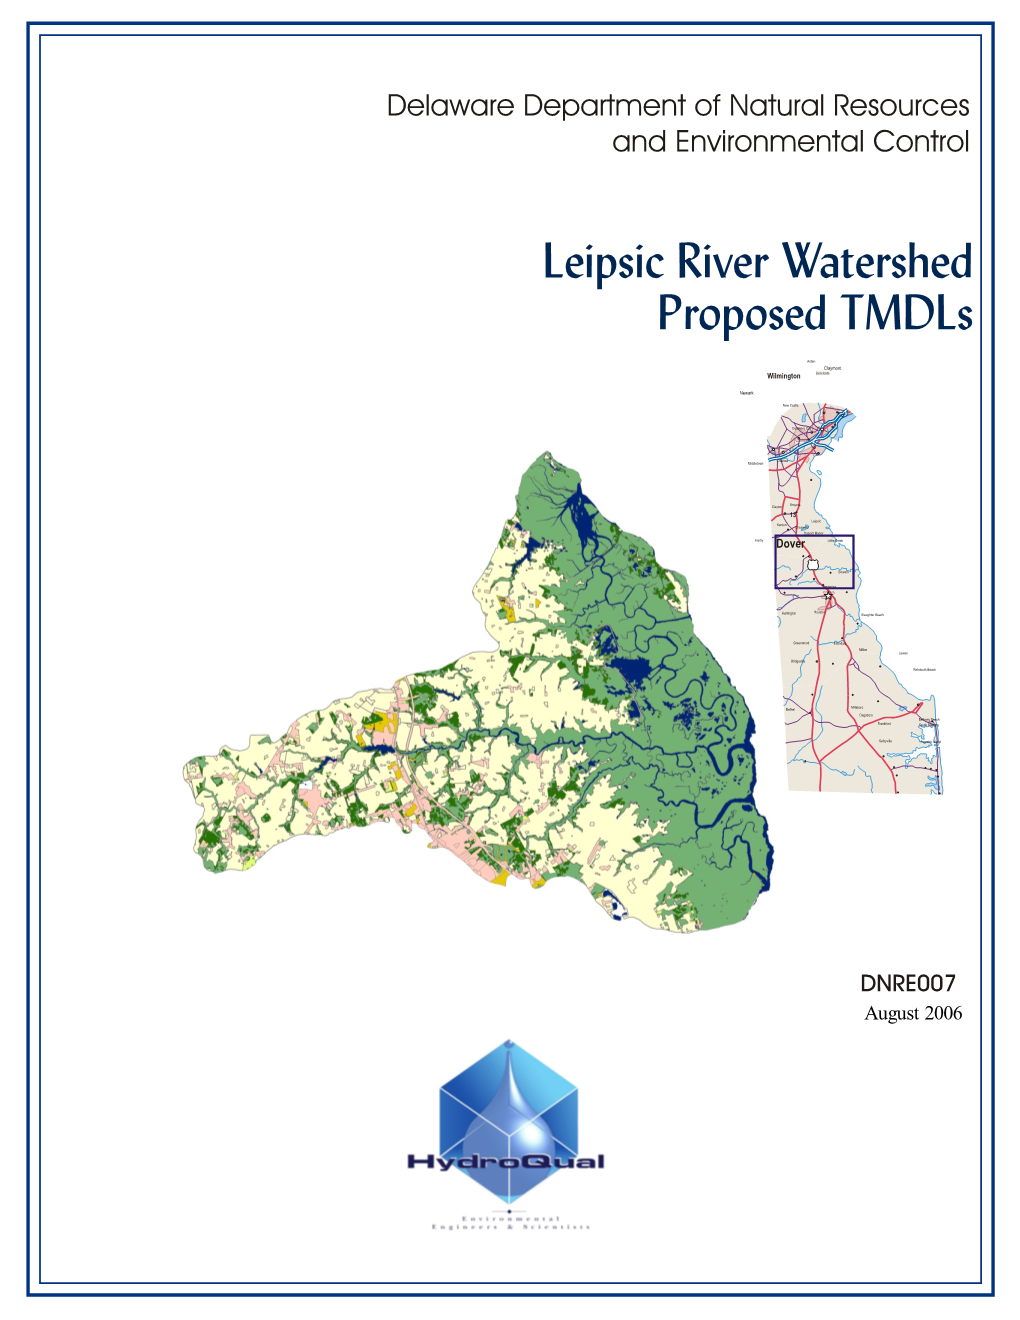 Leipsic River Watershed Proposed Tmdls